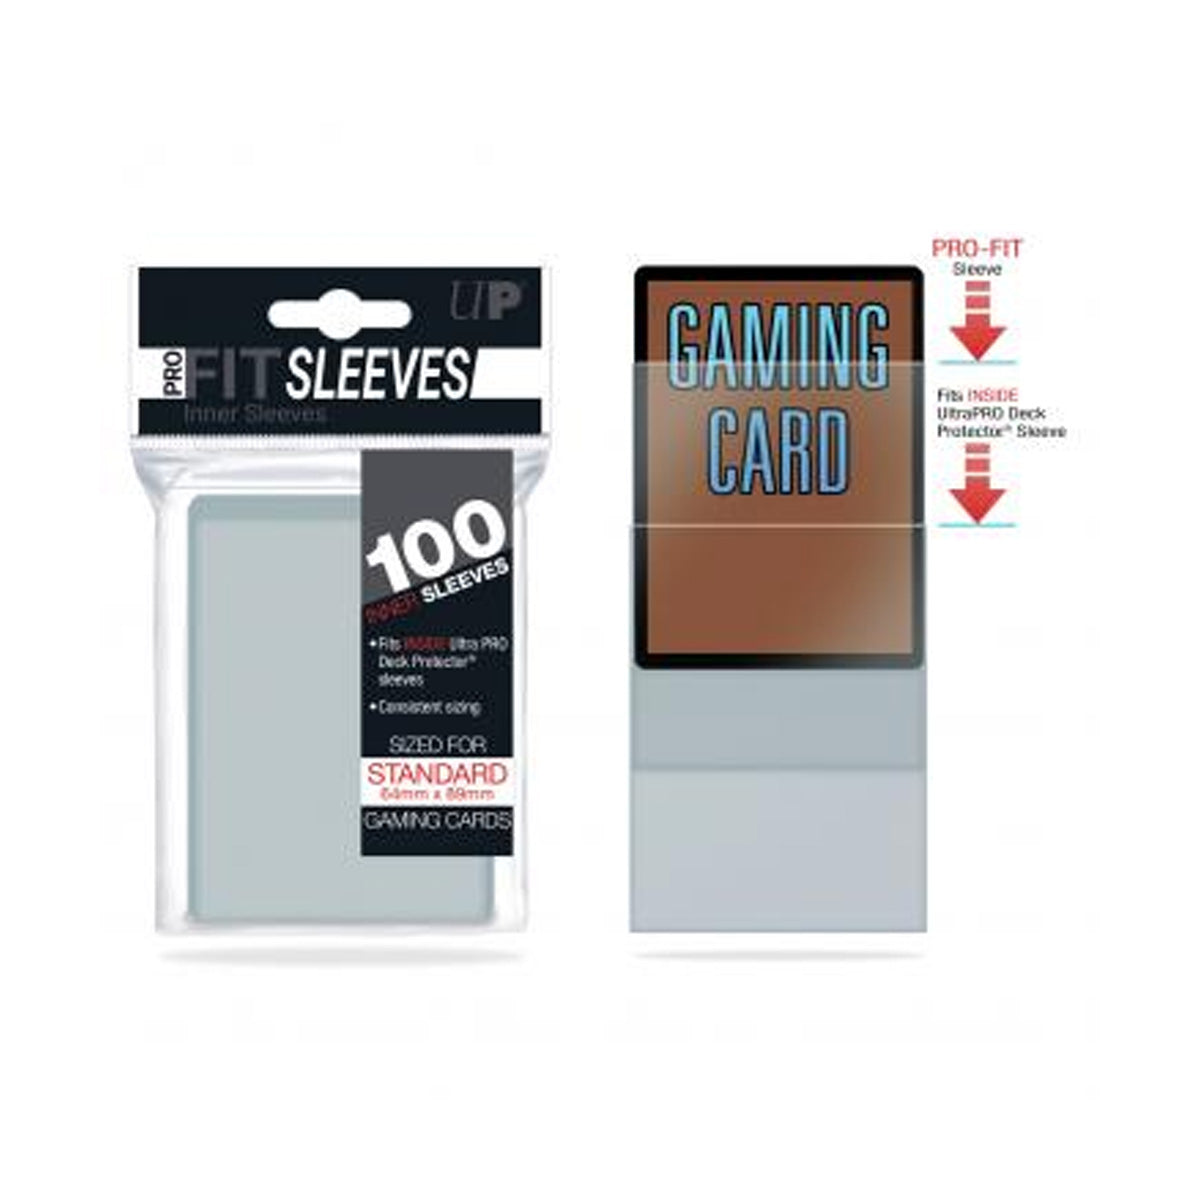 Platinum Series 16-Pocket Pages (100ct) for 41mm x 63mm Cards